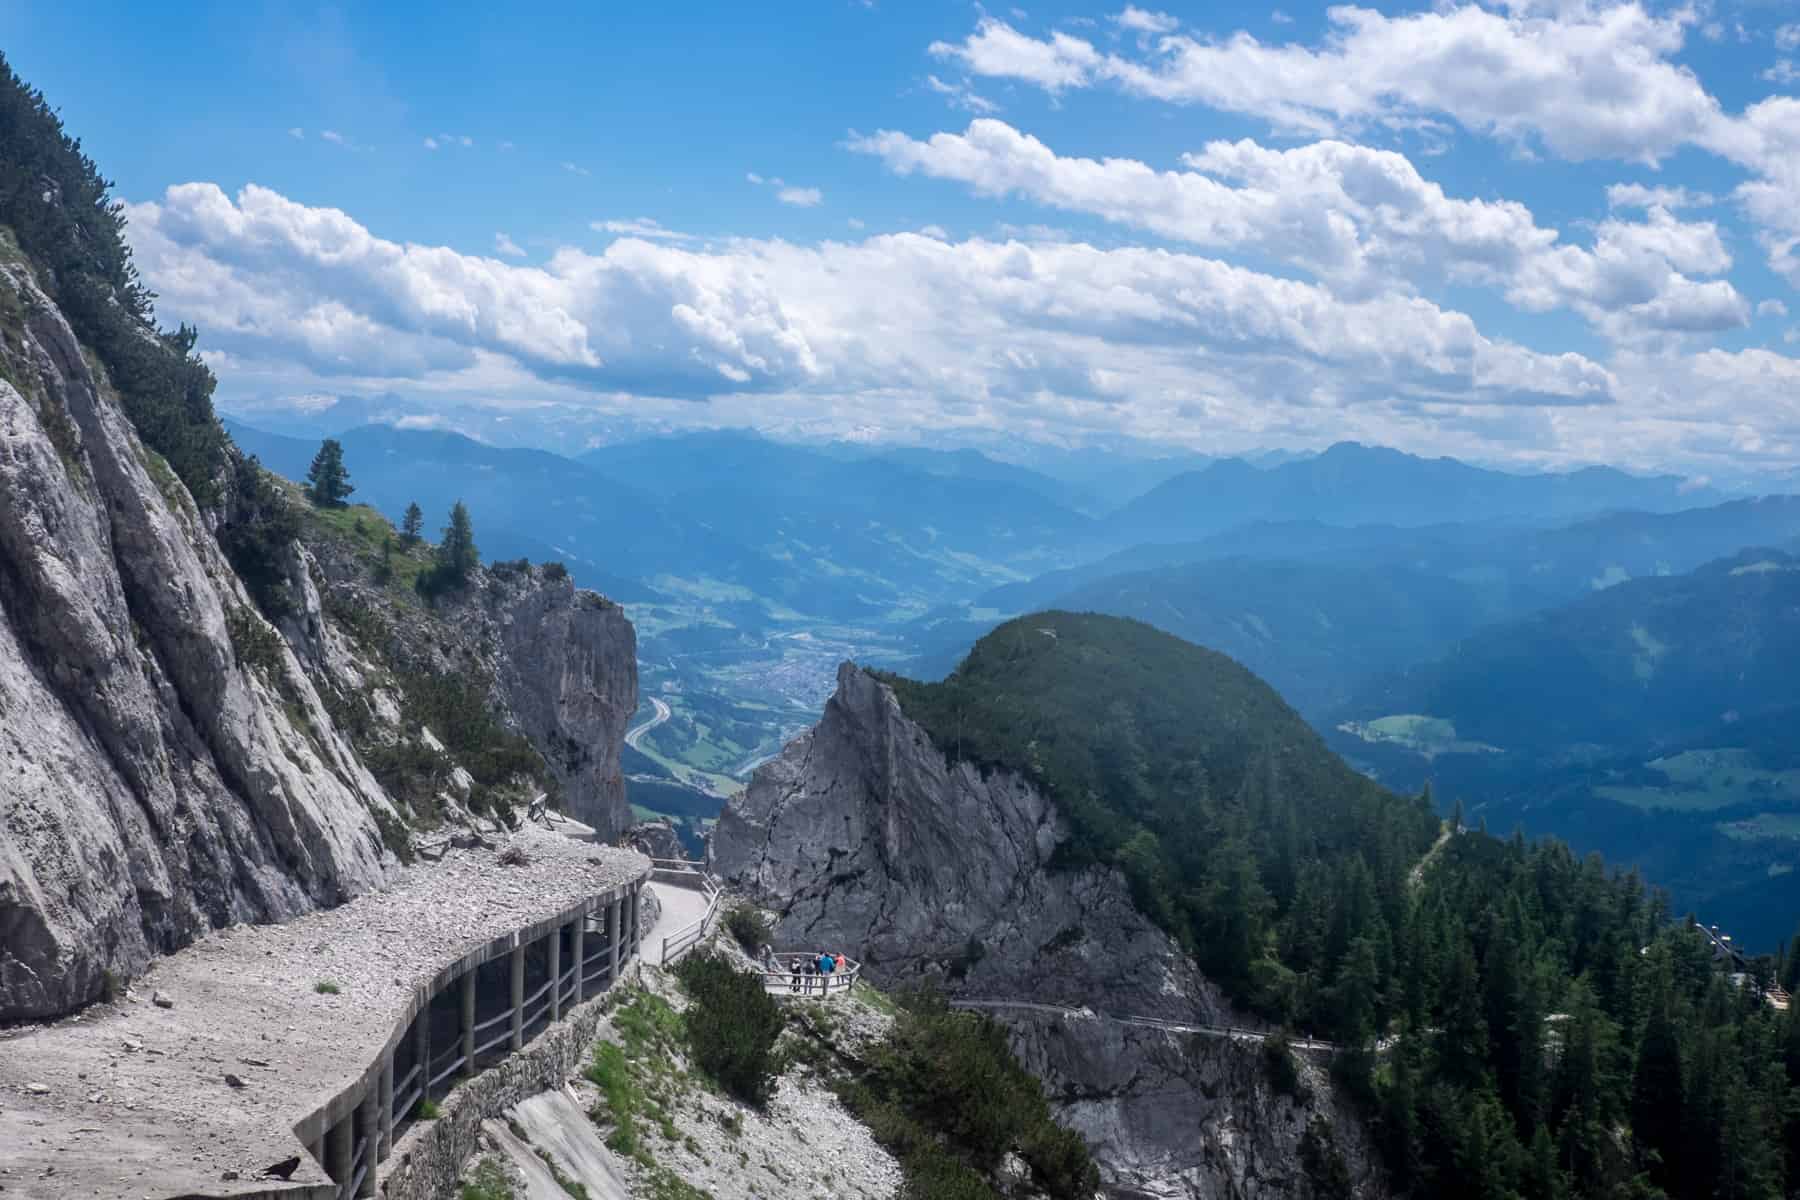 The vast valley view as seen from the elevated, rocky, limestone mountain entrance to the Eisriesenwelt cave in Austria